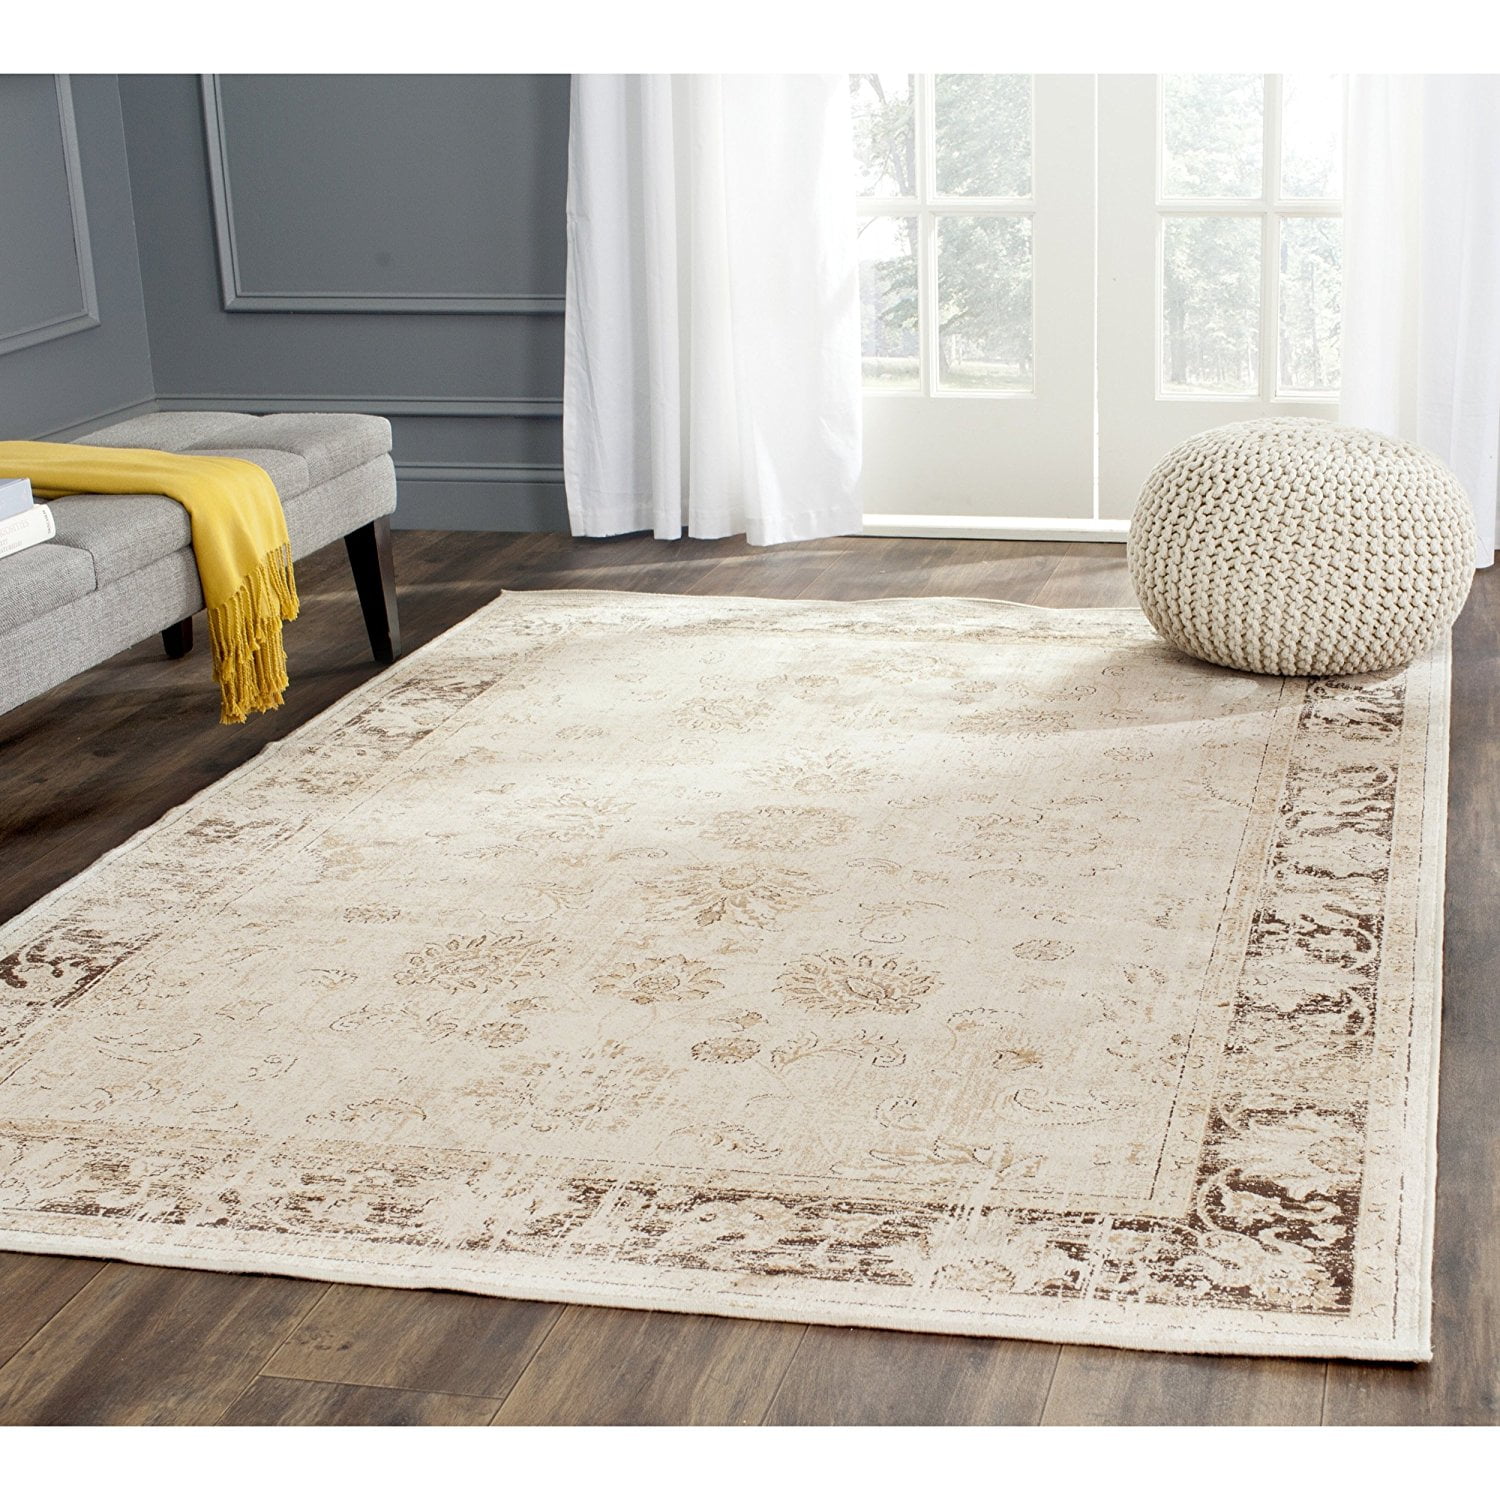 Safavieh Courtyard Collection Cy6918-244 Green and Beige Square Area Rug 7 Feet for sale online 